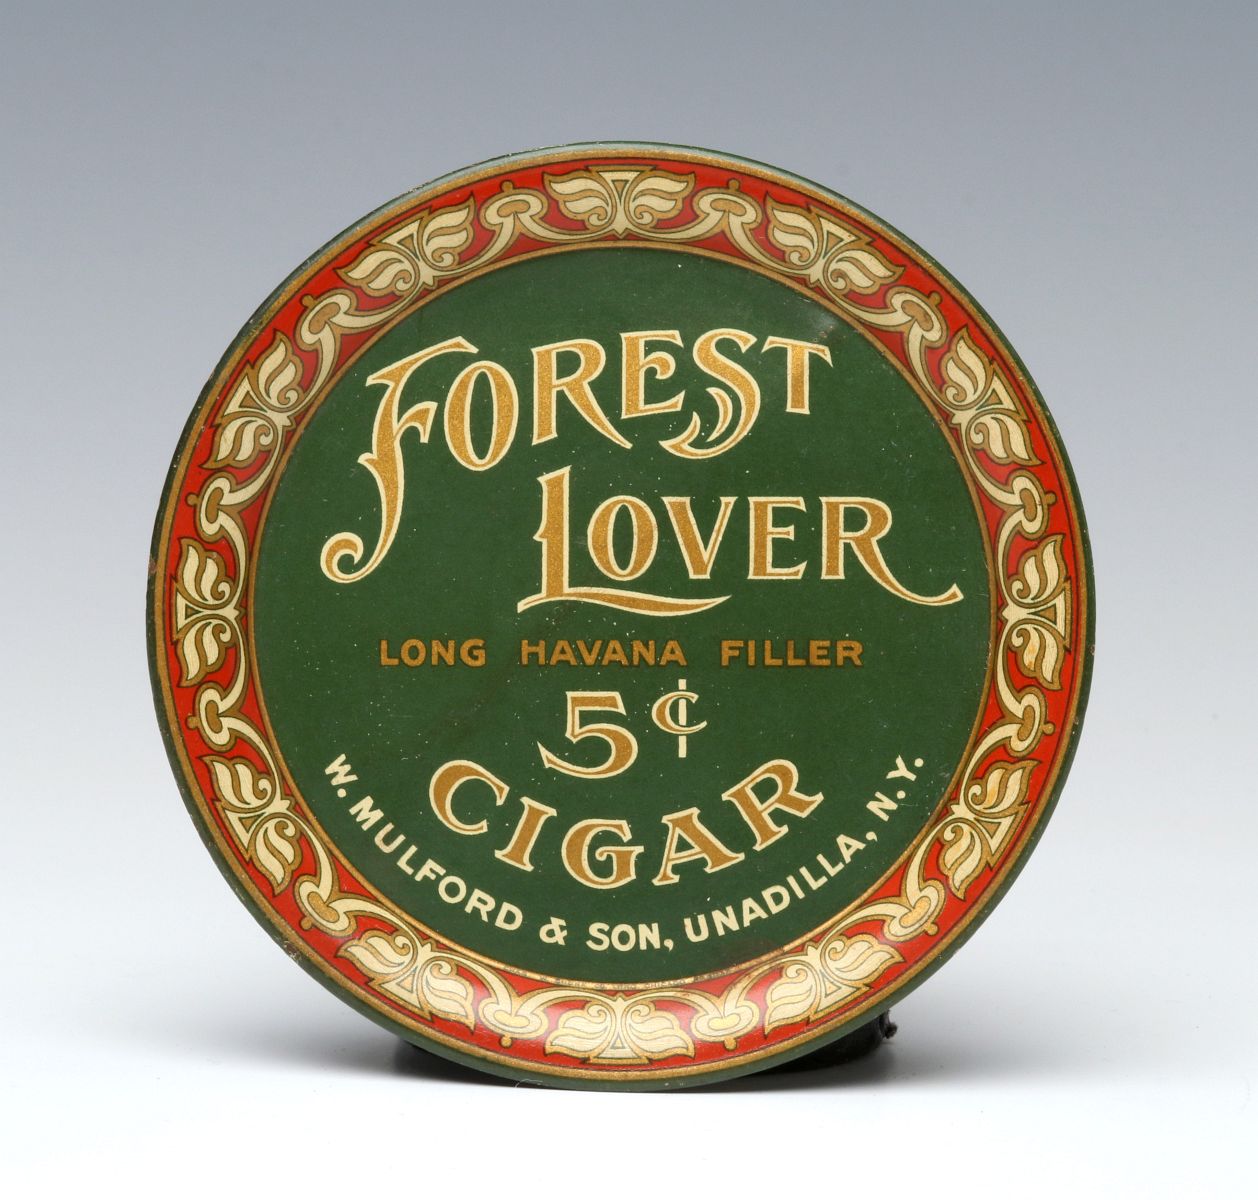 THE FOREST LOVER 5 CENT CIGAR ADVERTISING TIP TRAY